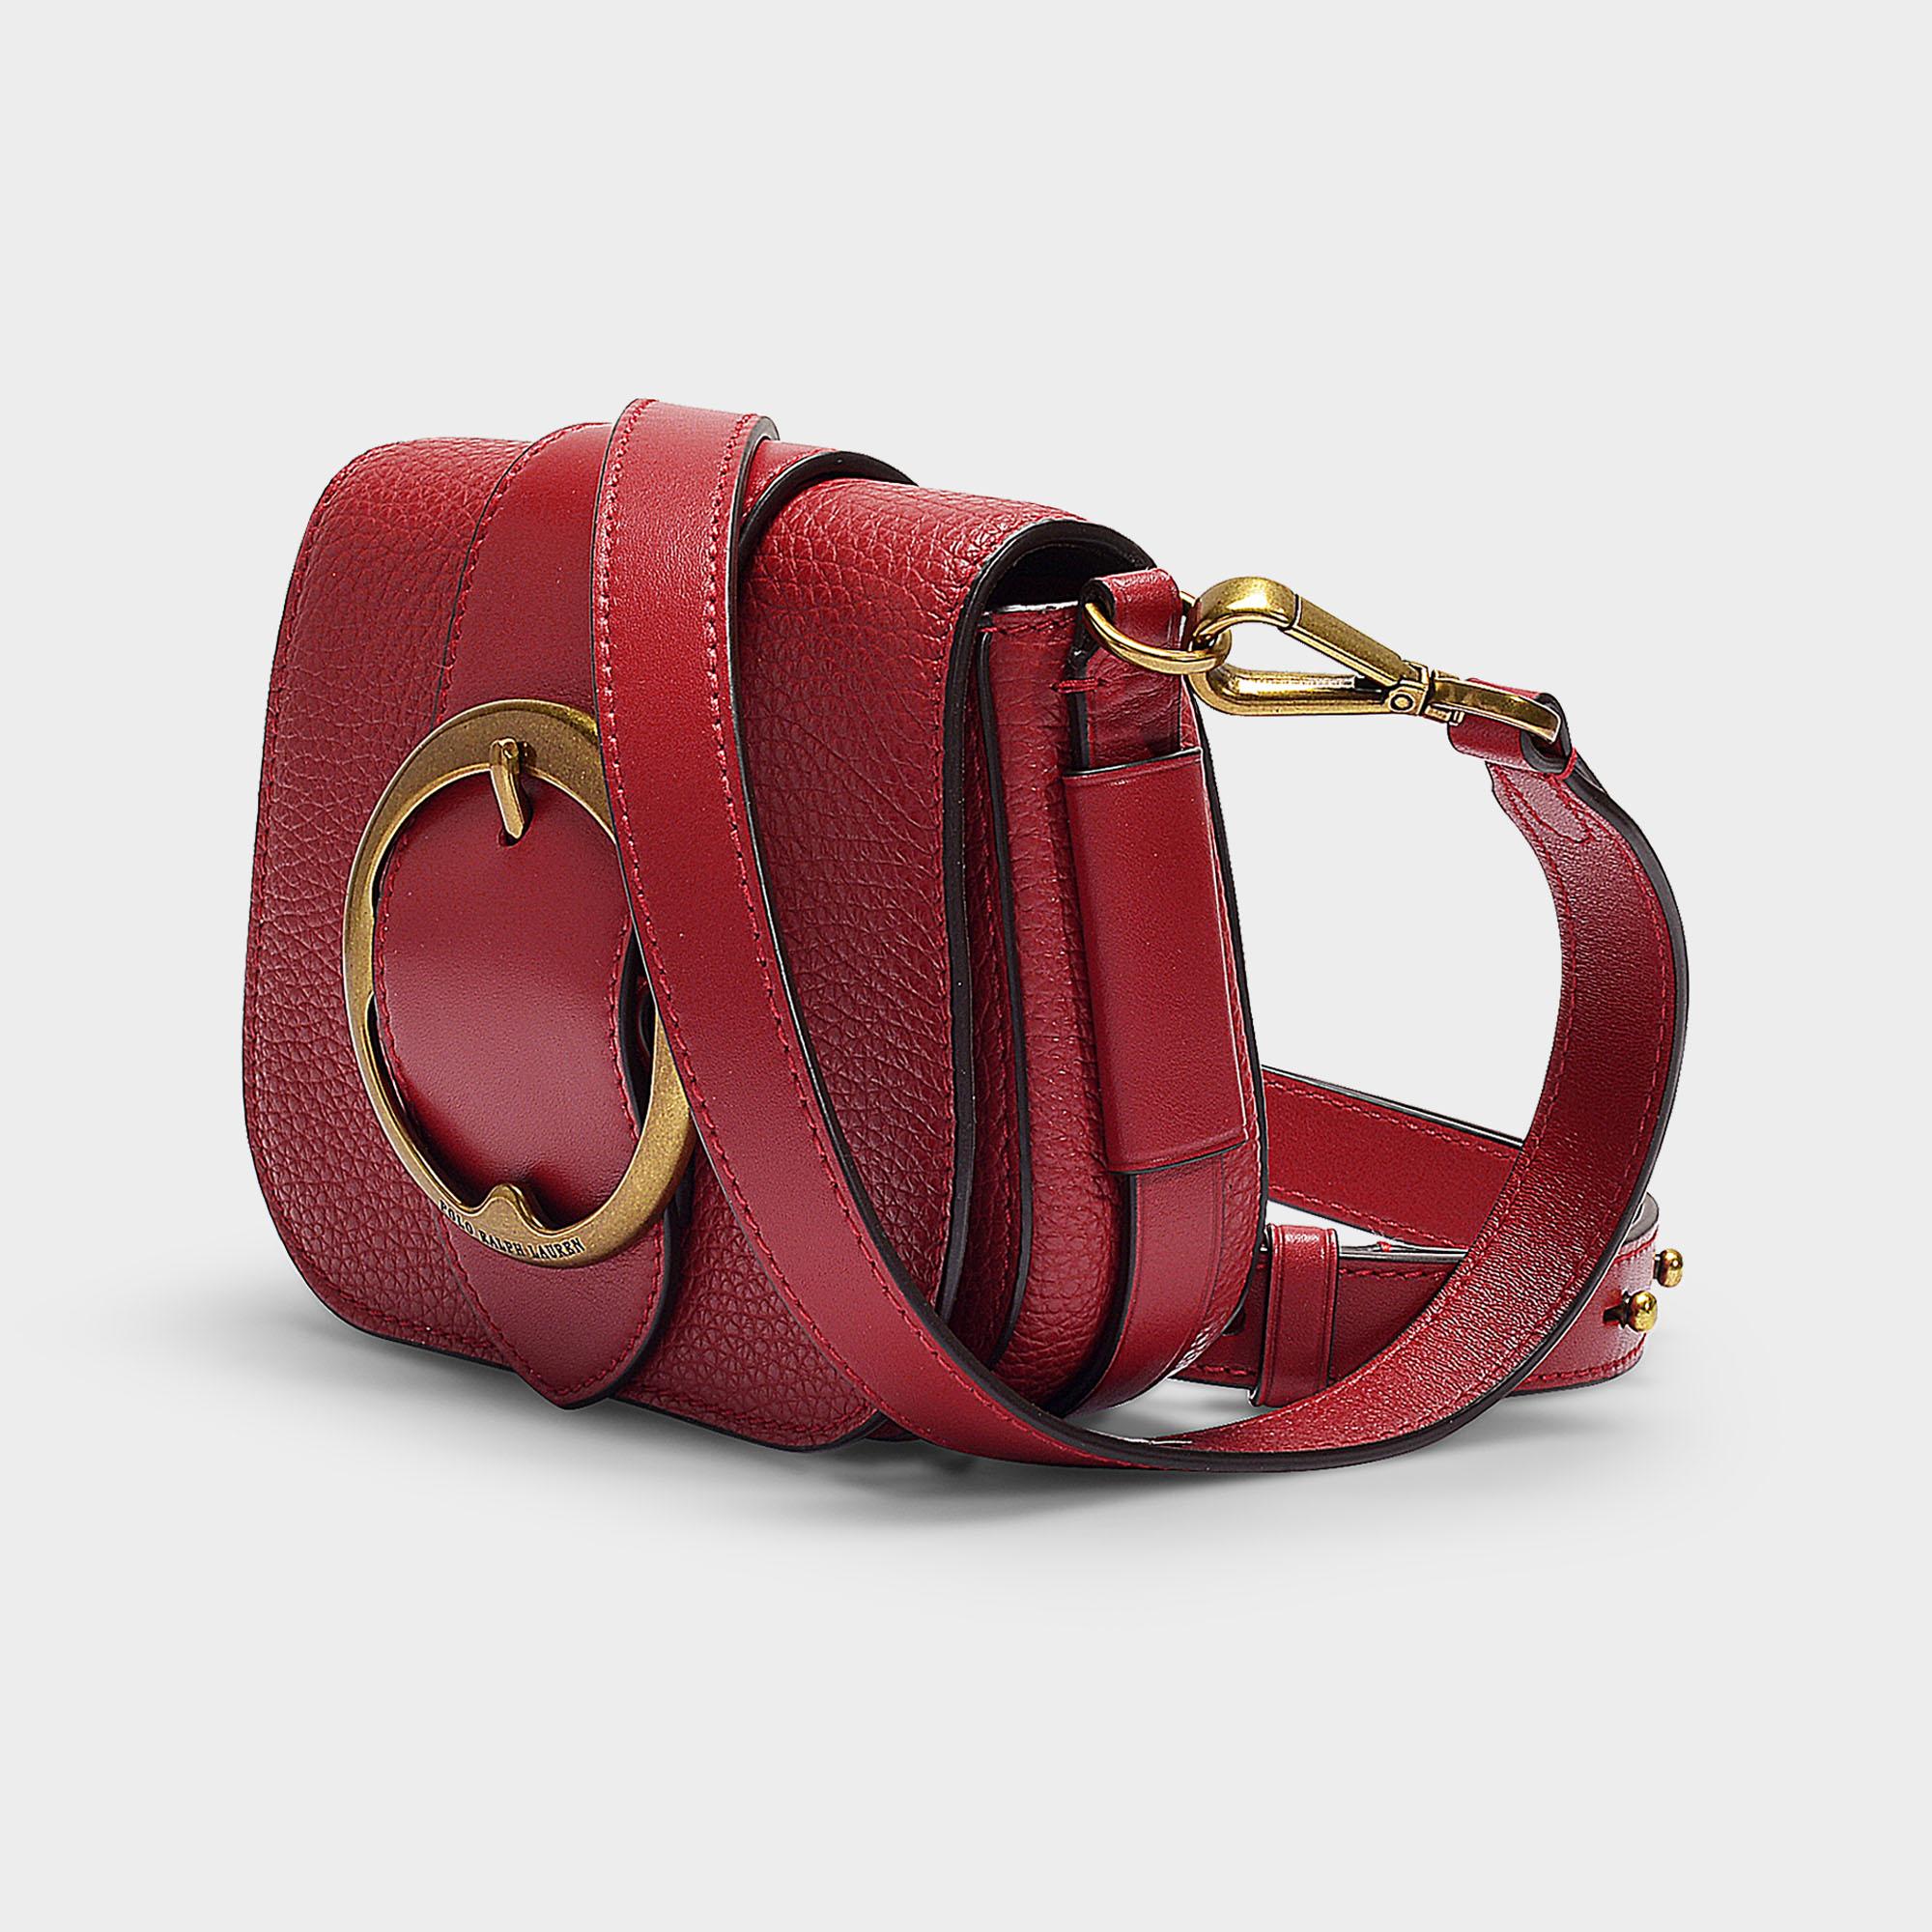 Polo Ralph Lauren Leather Mini Saddle Bag Womens in Red - Lyst